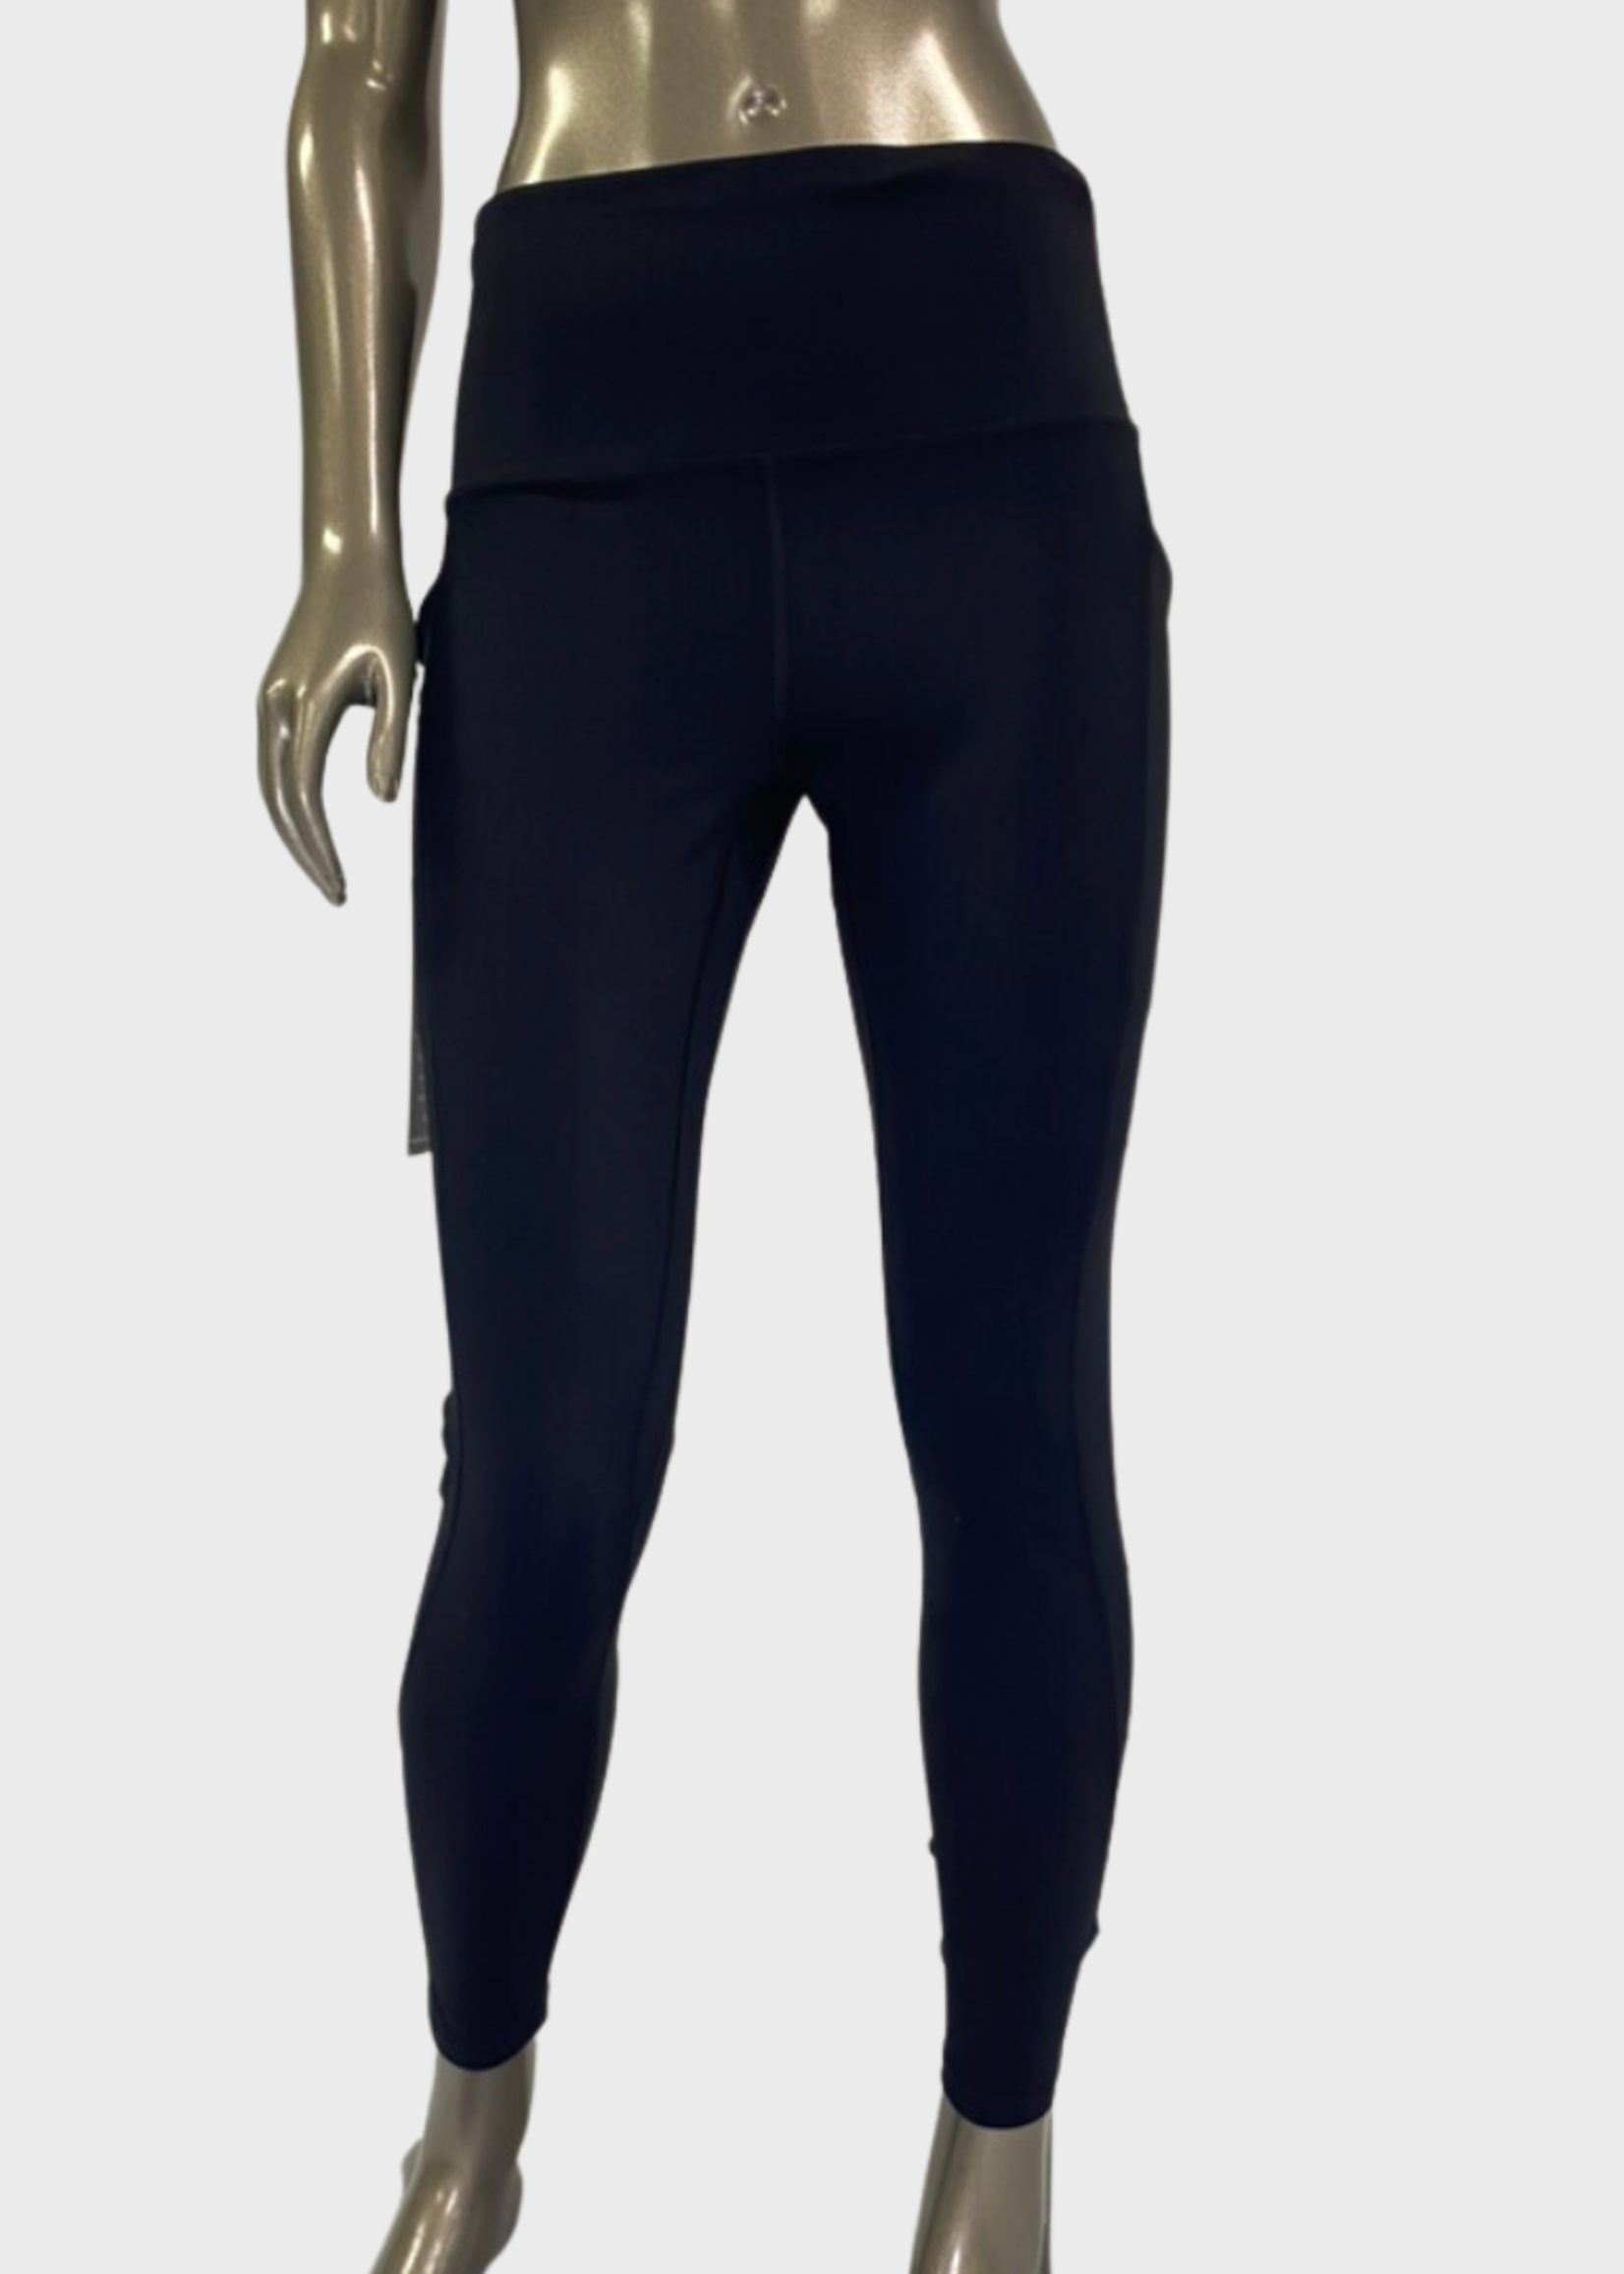 EXTRA  MILE WOMEN'S BRUSHED RUNNING TIGHT